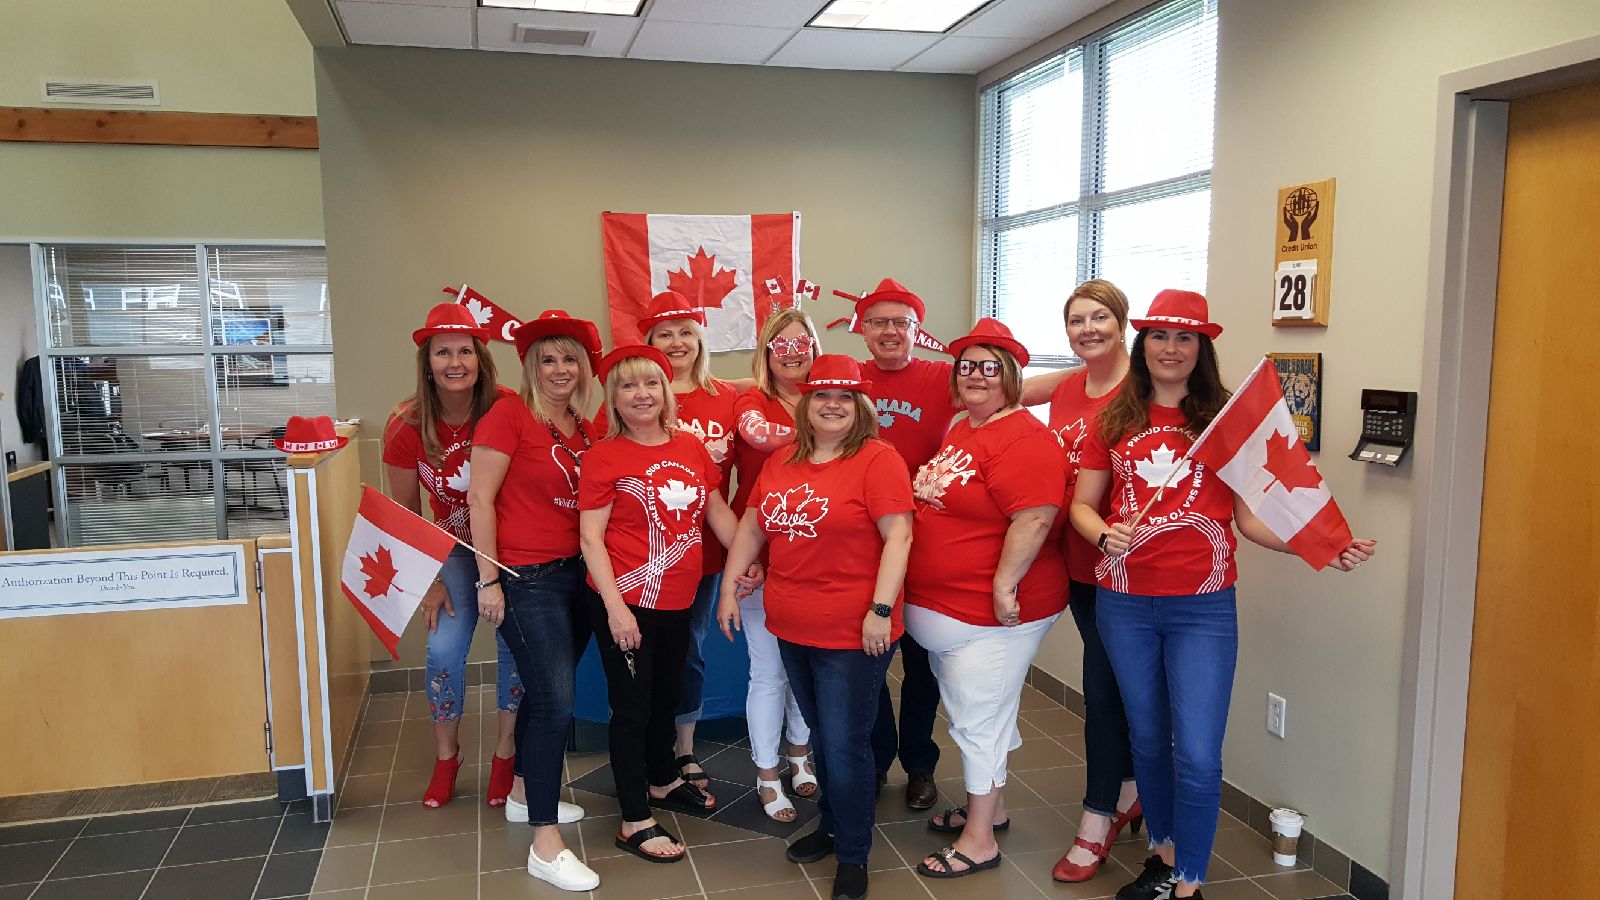 PSCU wishing you a Happy Canada Day on July 1st